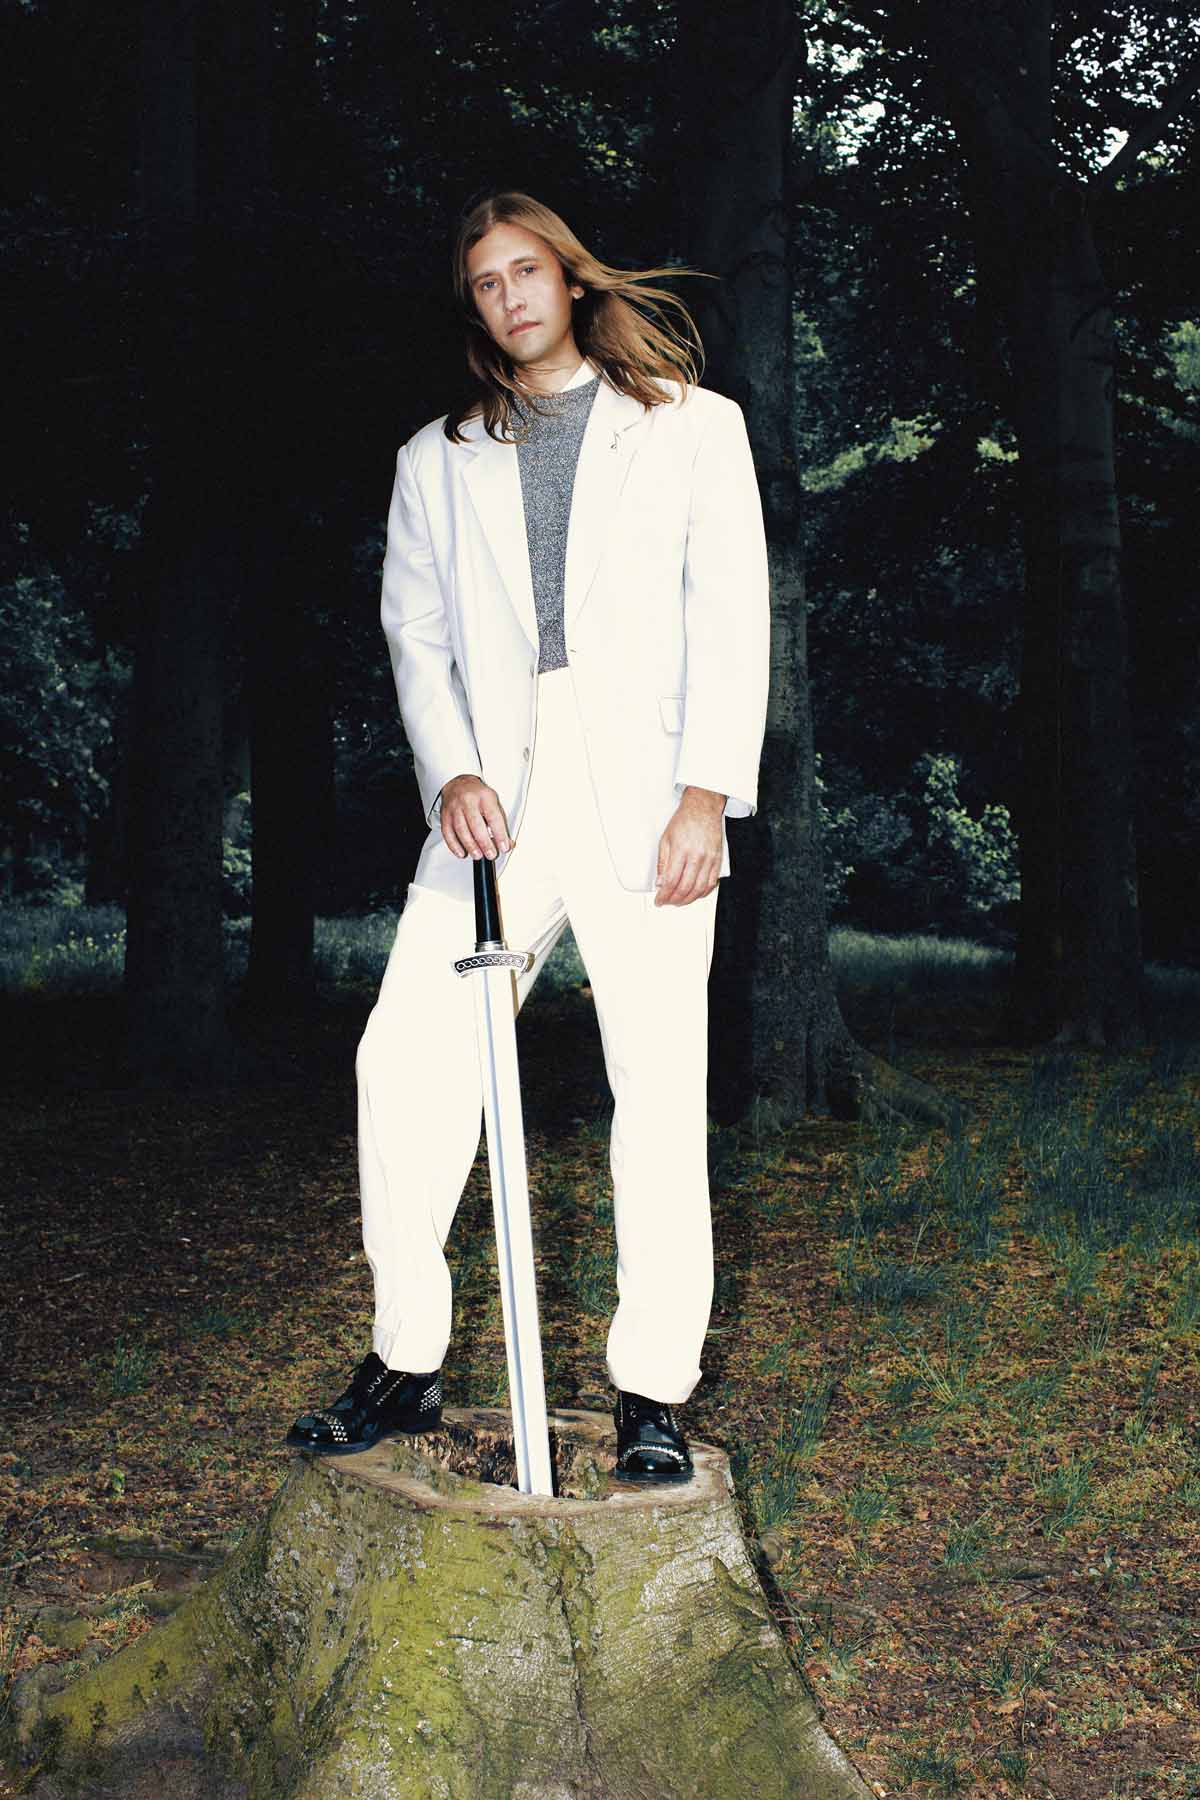 White man with long light brown hair stands in a forest on a tree stump with a sword stuck in it. Jaakko Eino Kalevi is wearing a white suit, black shoes and a grey top under his jacket. His hair is slightly blown by the wind, he has one hand loosely on the hilt of the sword and looks into the camera.